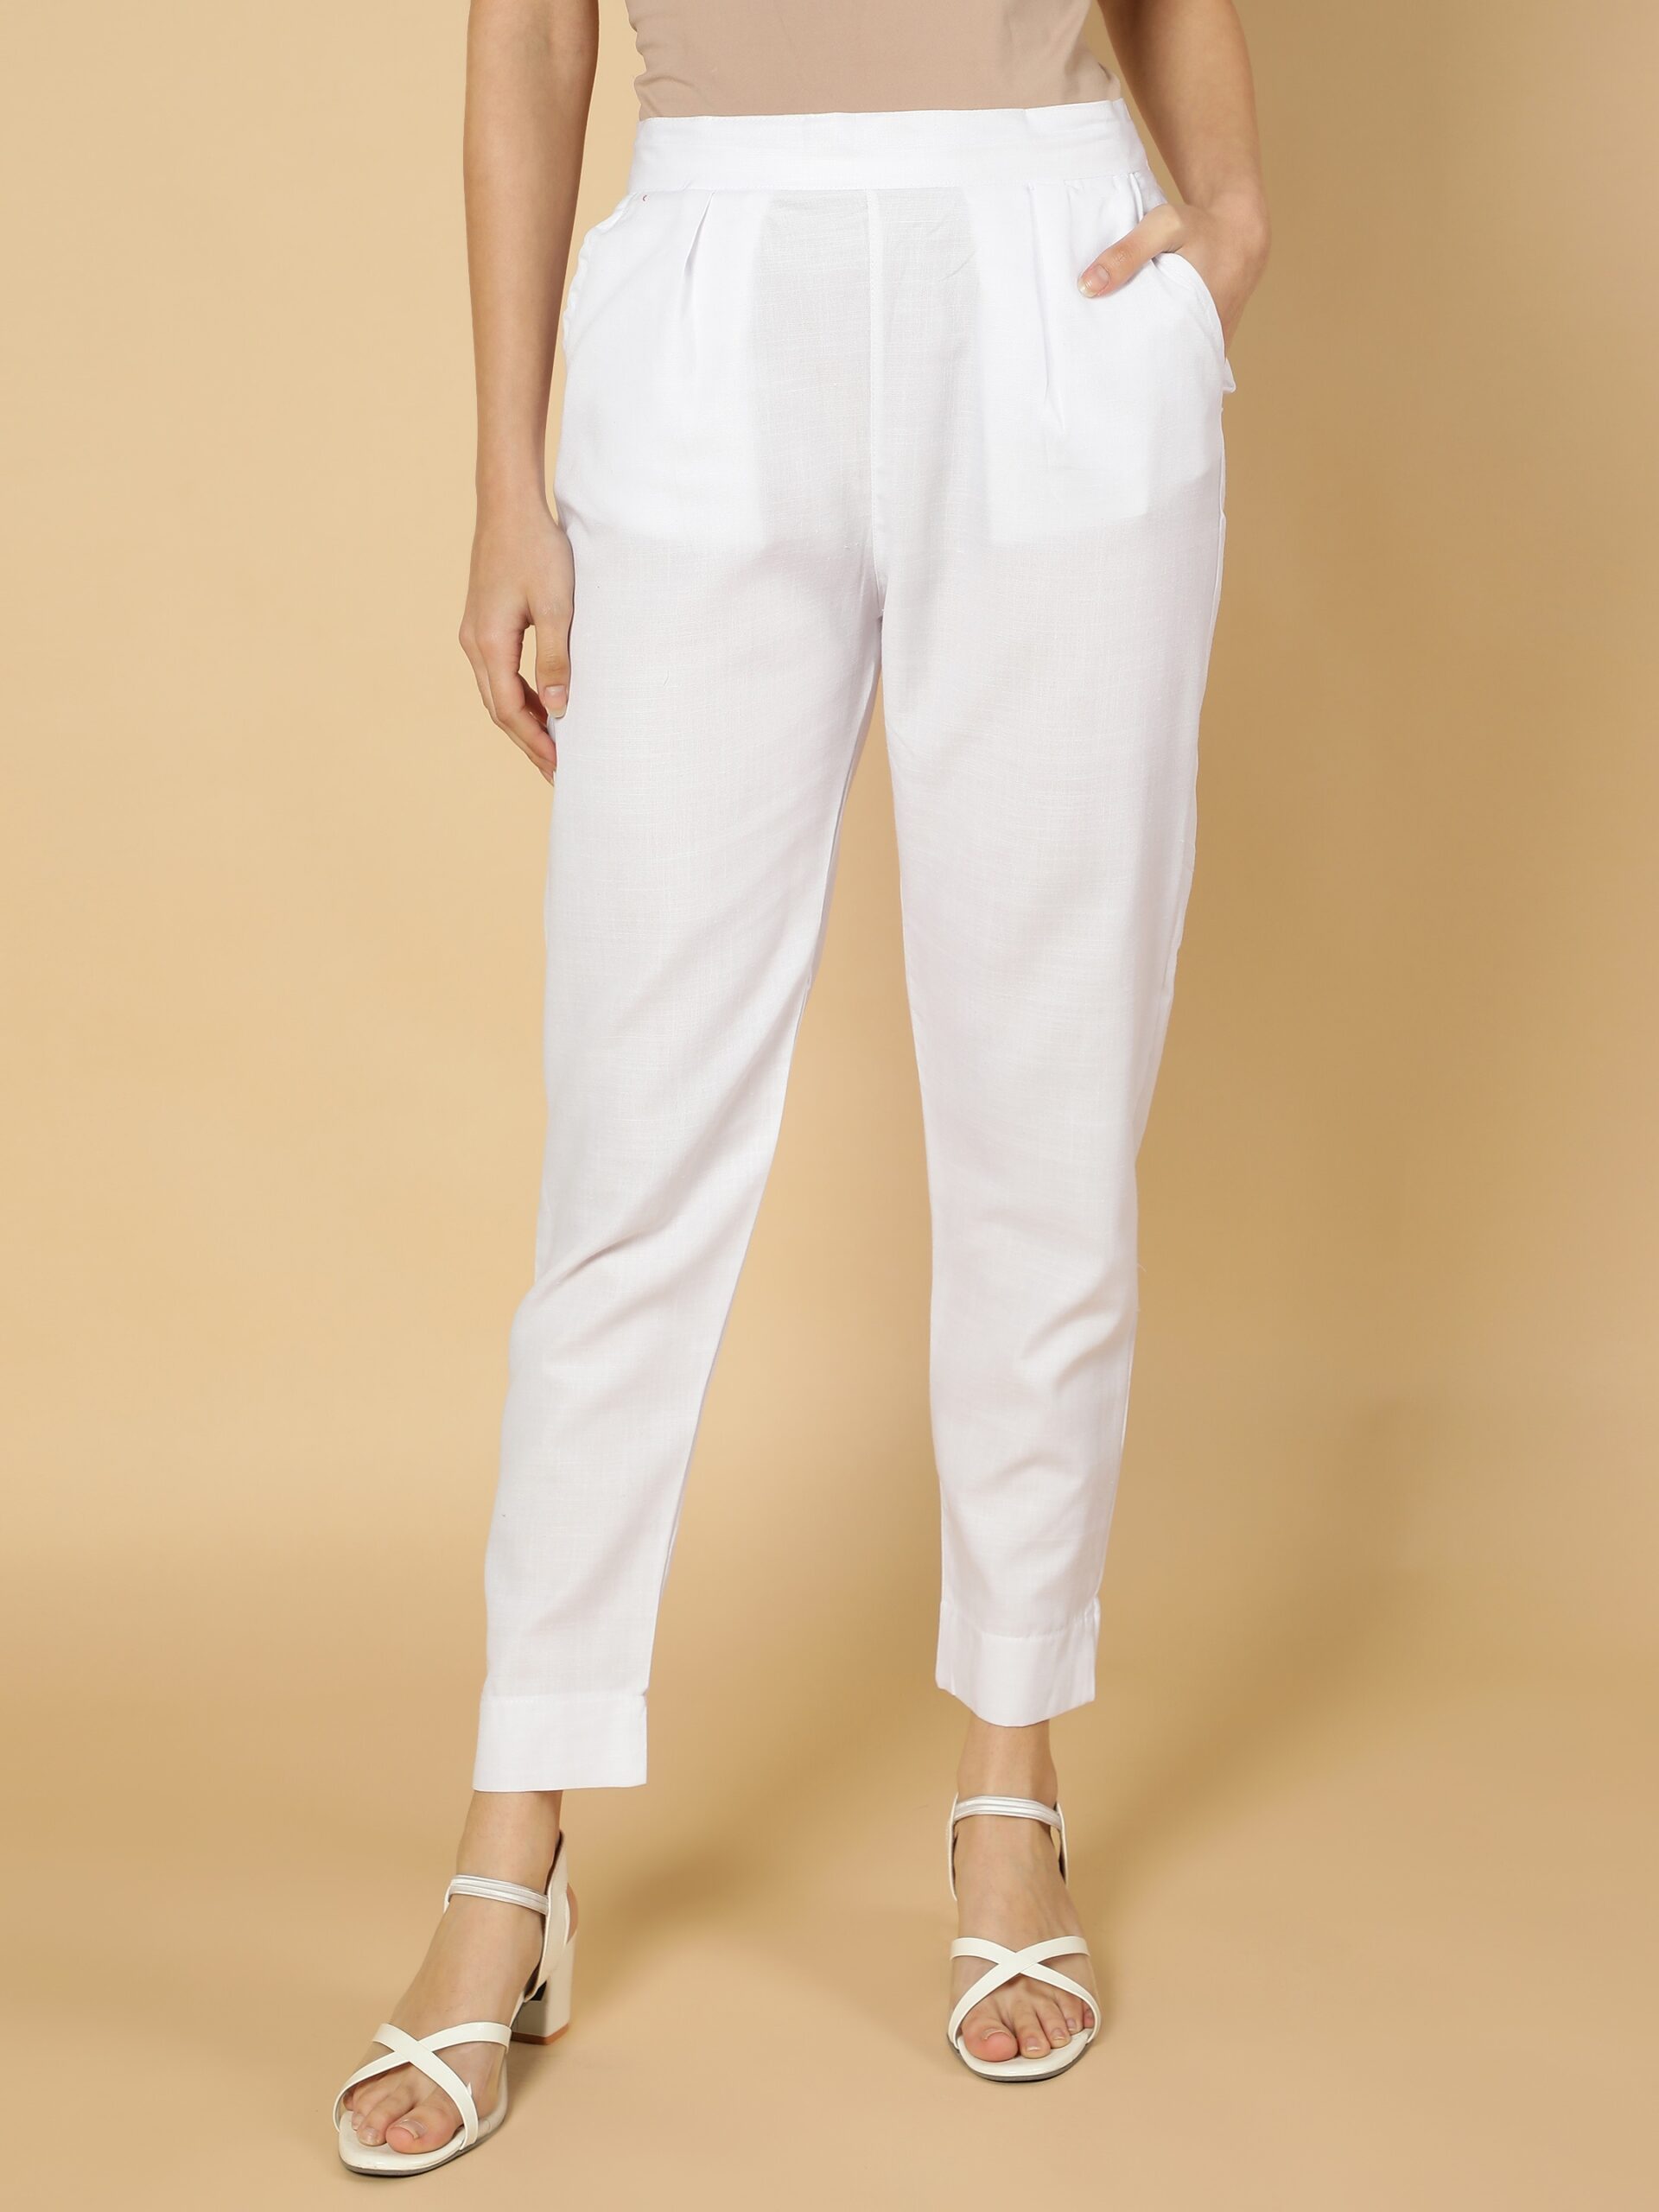 White Trousers for Women - JCPenney-anthinhphatland.vn